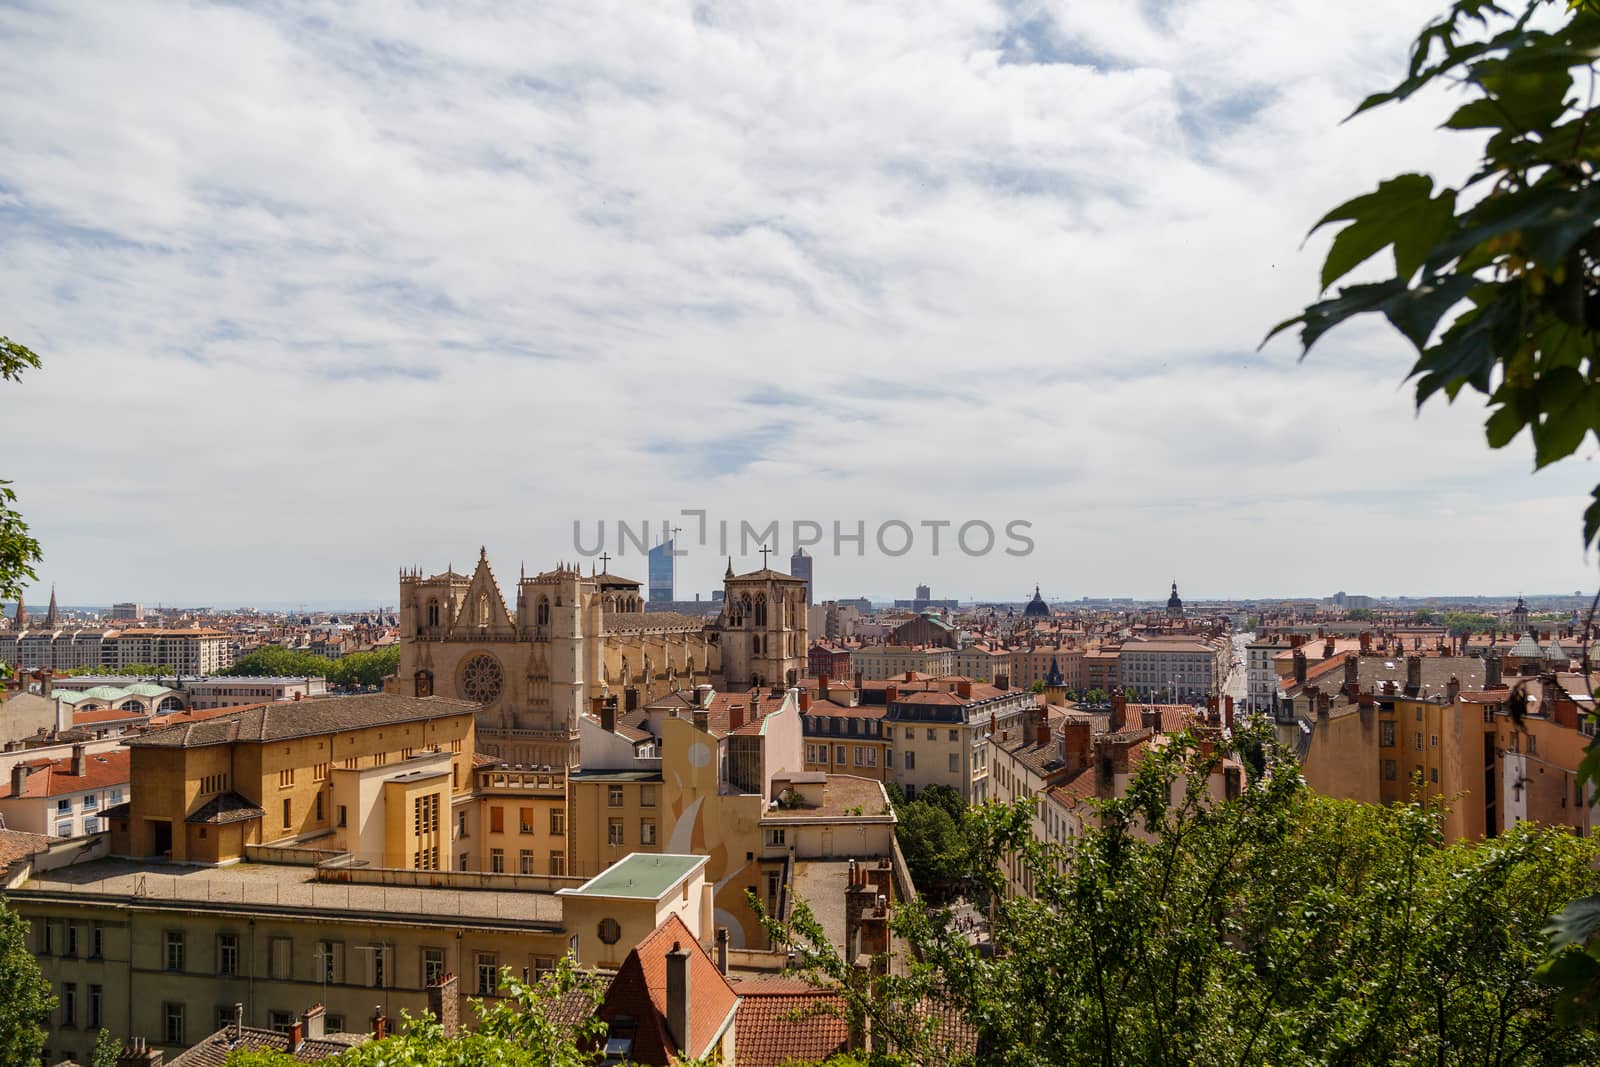 Lyon, France - CIRCA 2019: Picturesque historical Lyon Old Town buildings on the bank of Saone River. Lyon, Region Auvergne-Rhone-Alpes, France. by dugulan